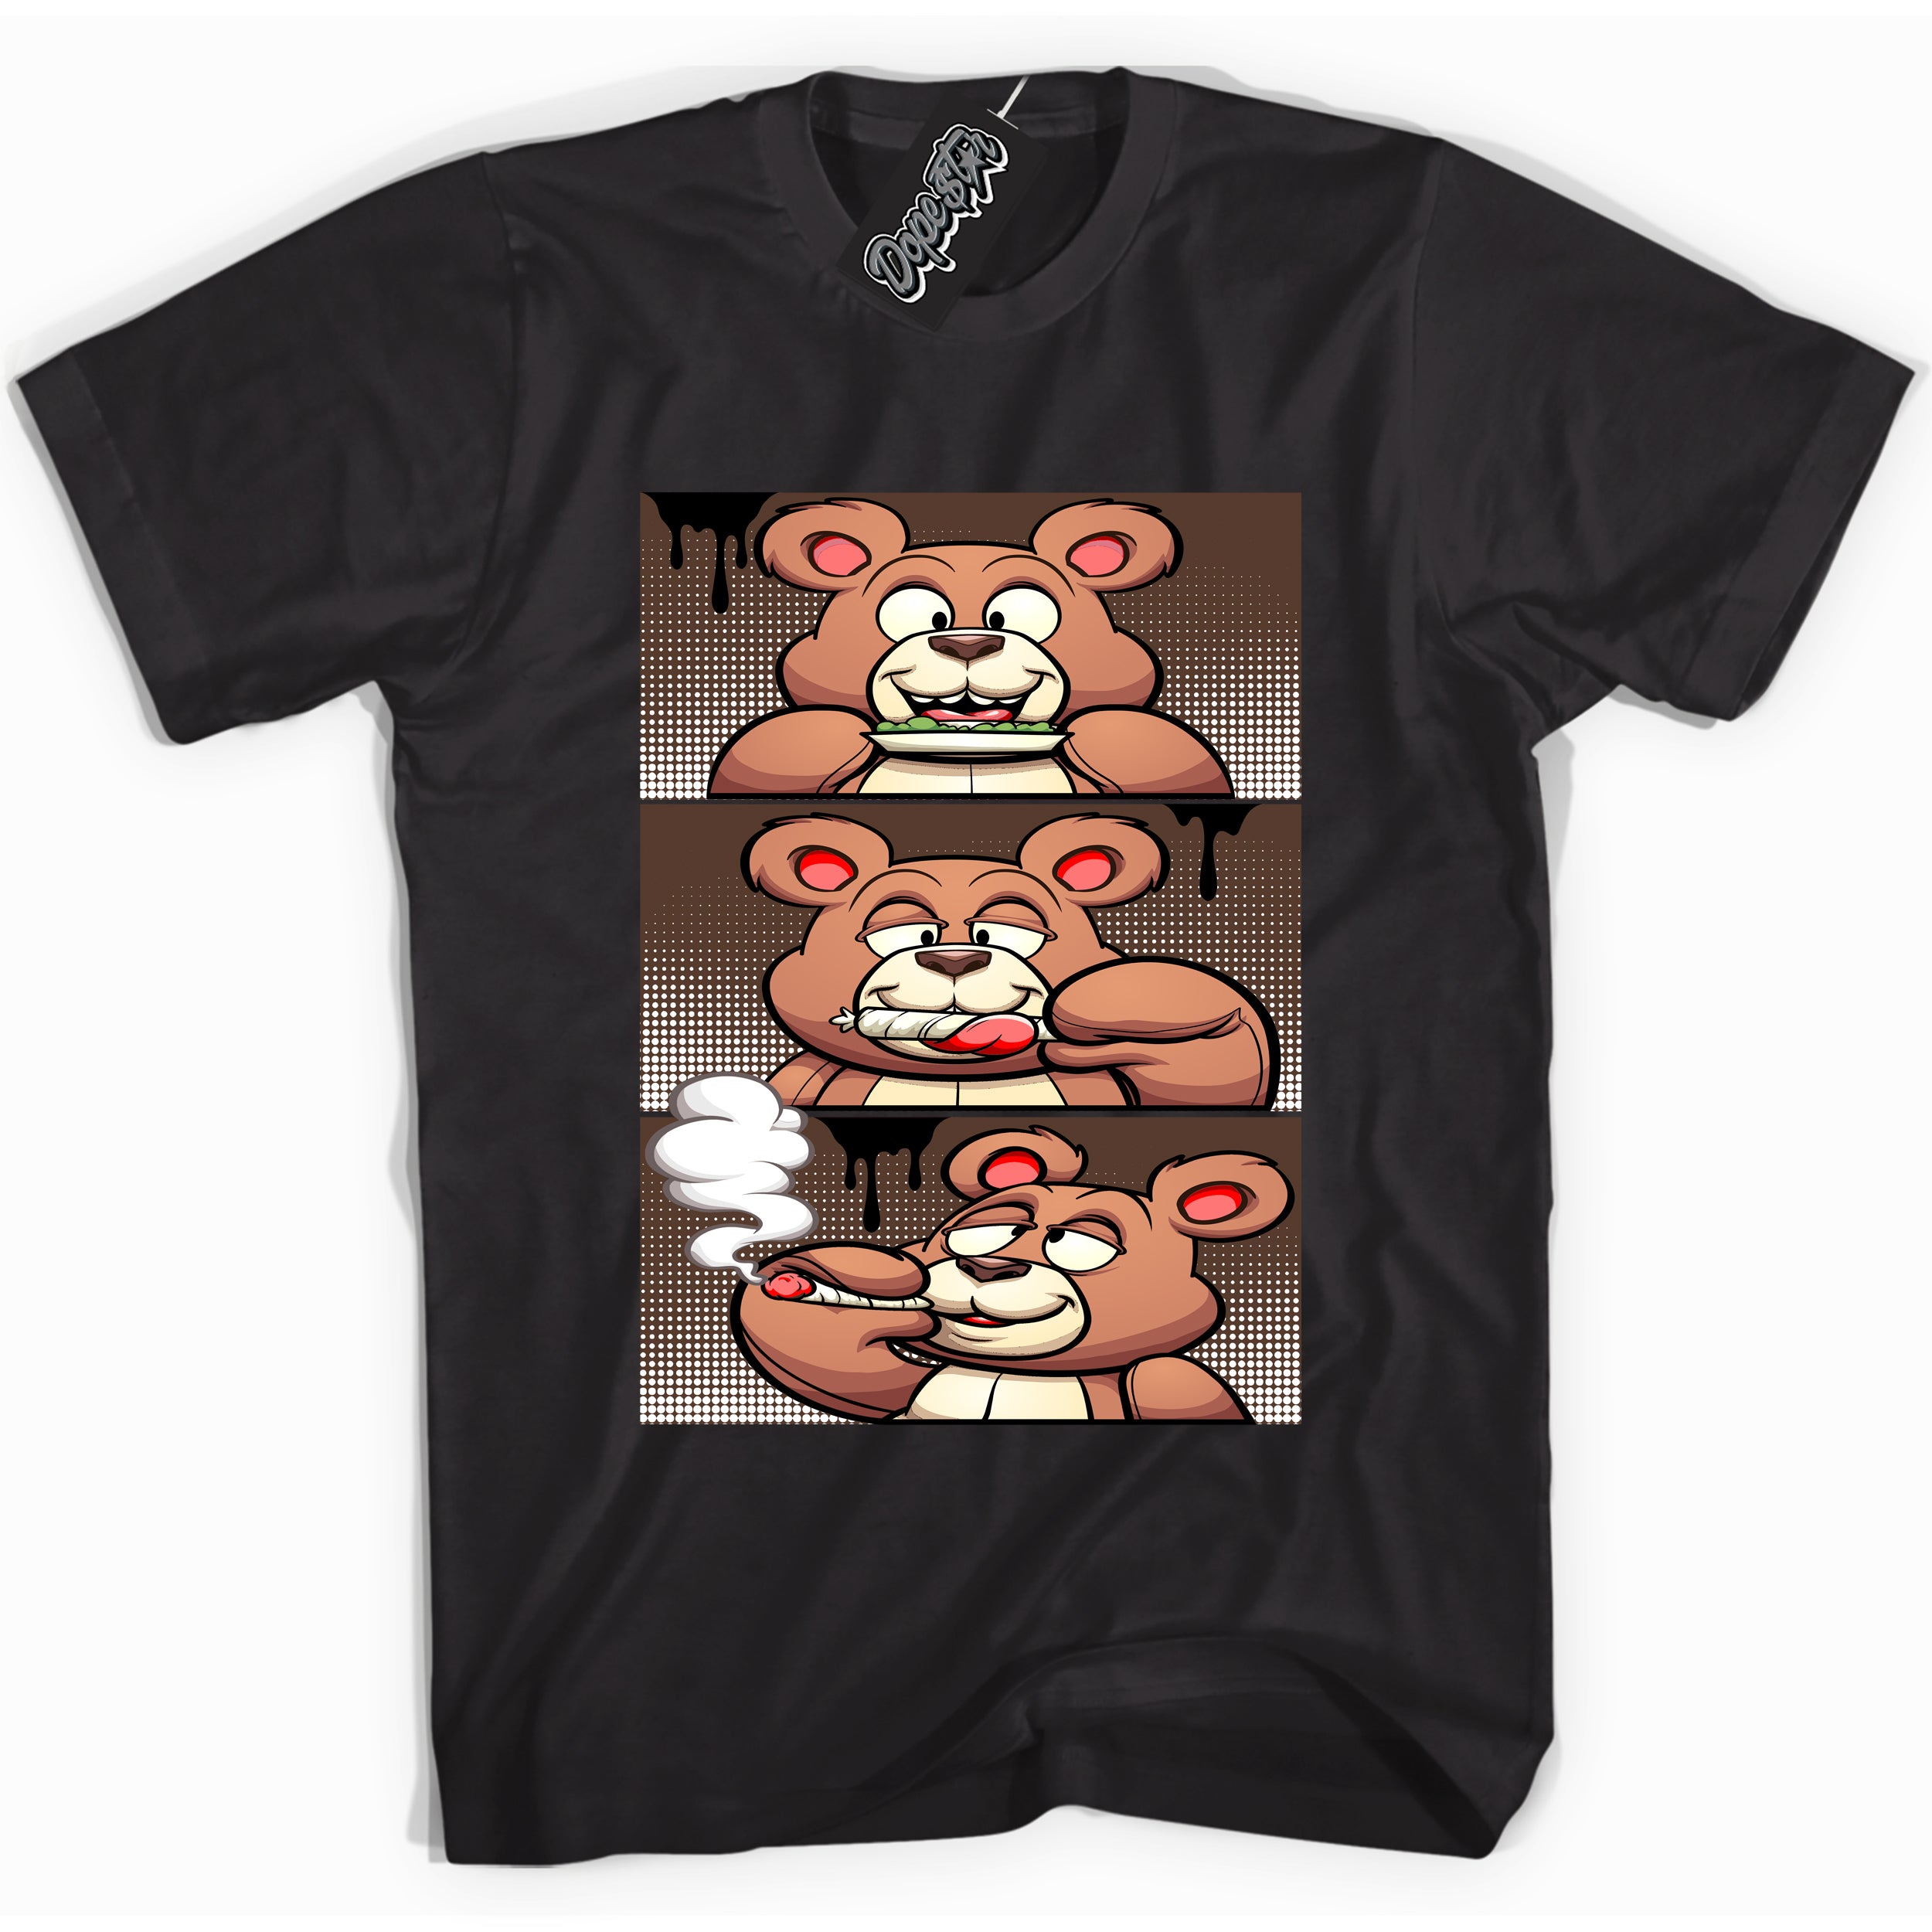 Cool Black graphic tee with “ Roll It Lick It Smoke It Bear ” design, that perfectly matches Palomino 1s sneakers 